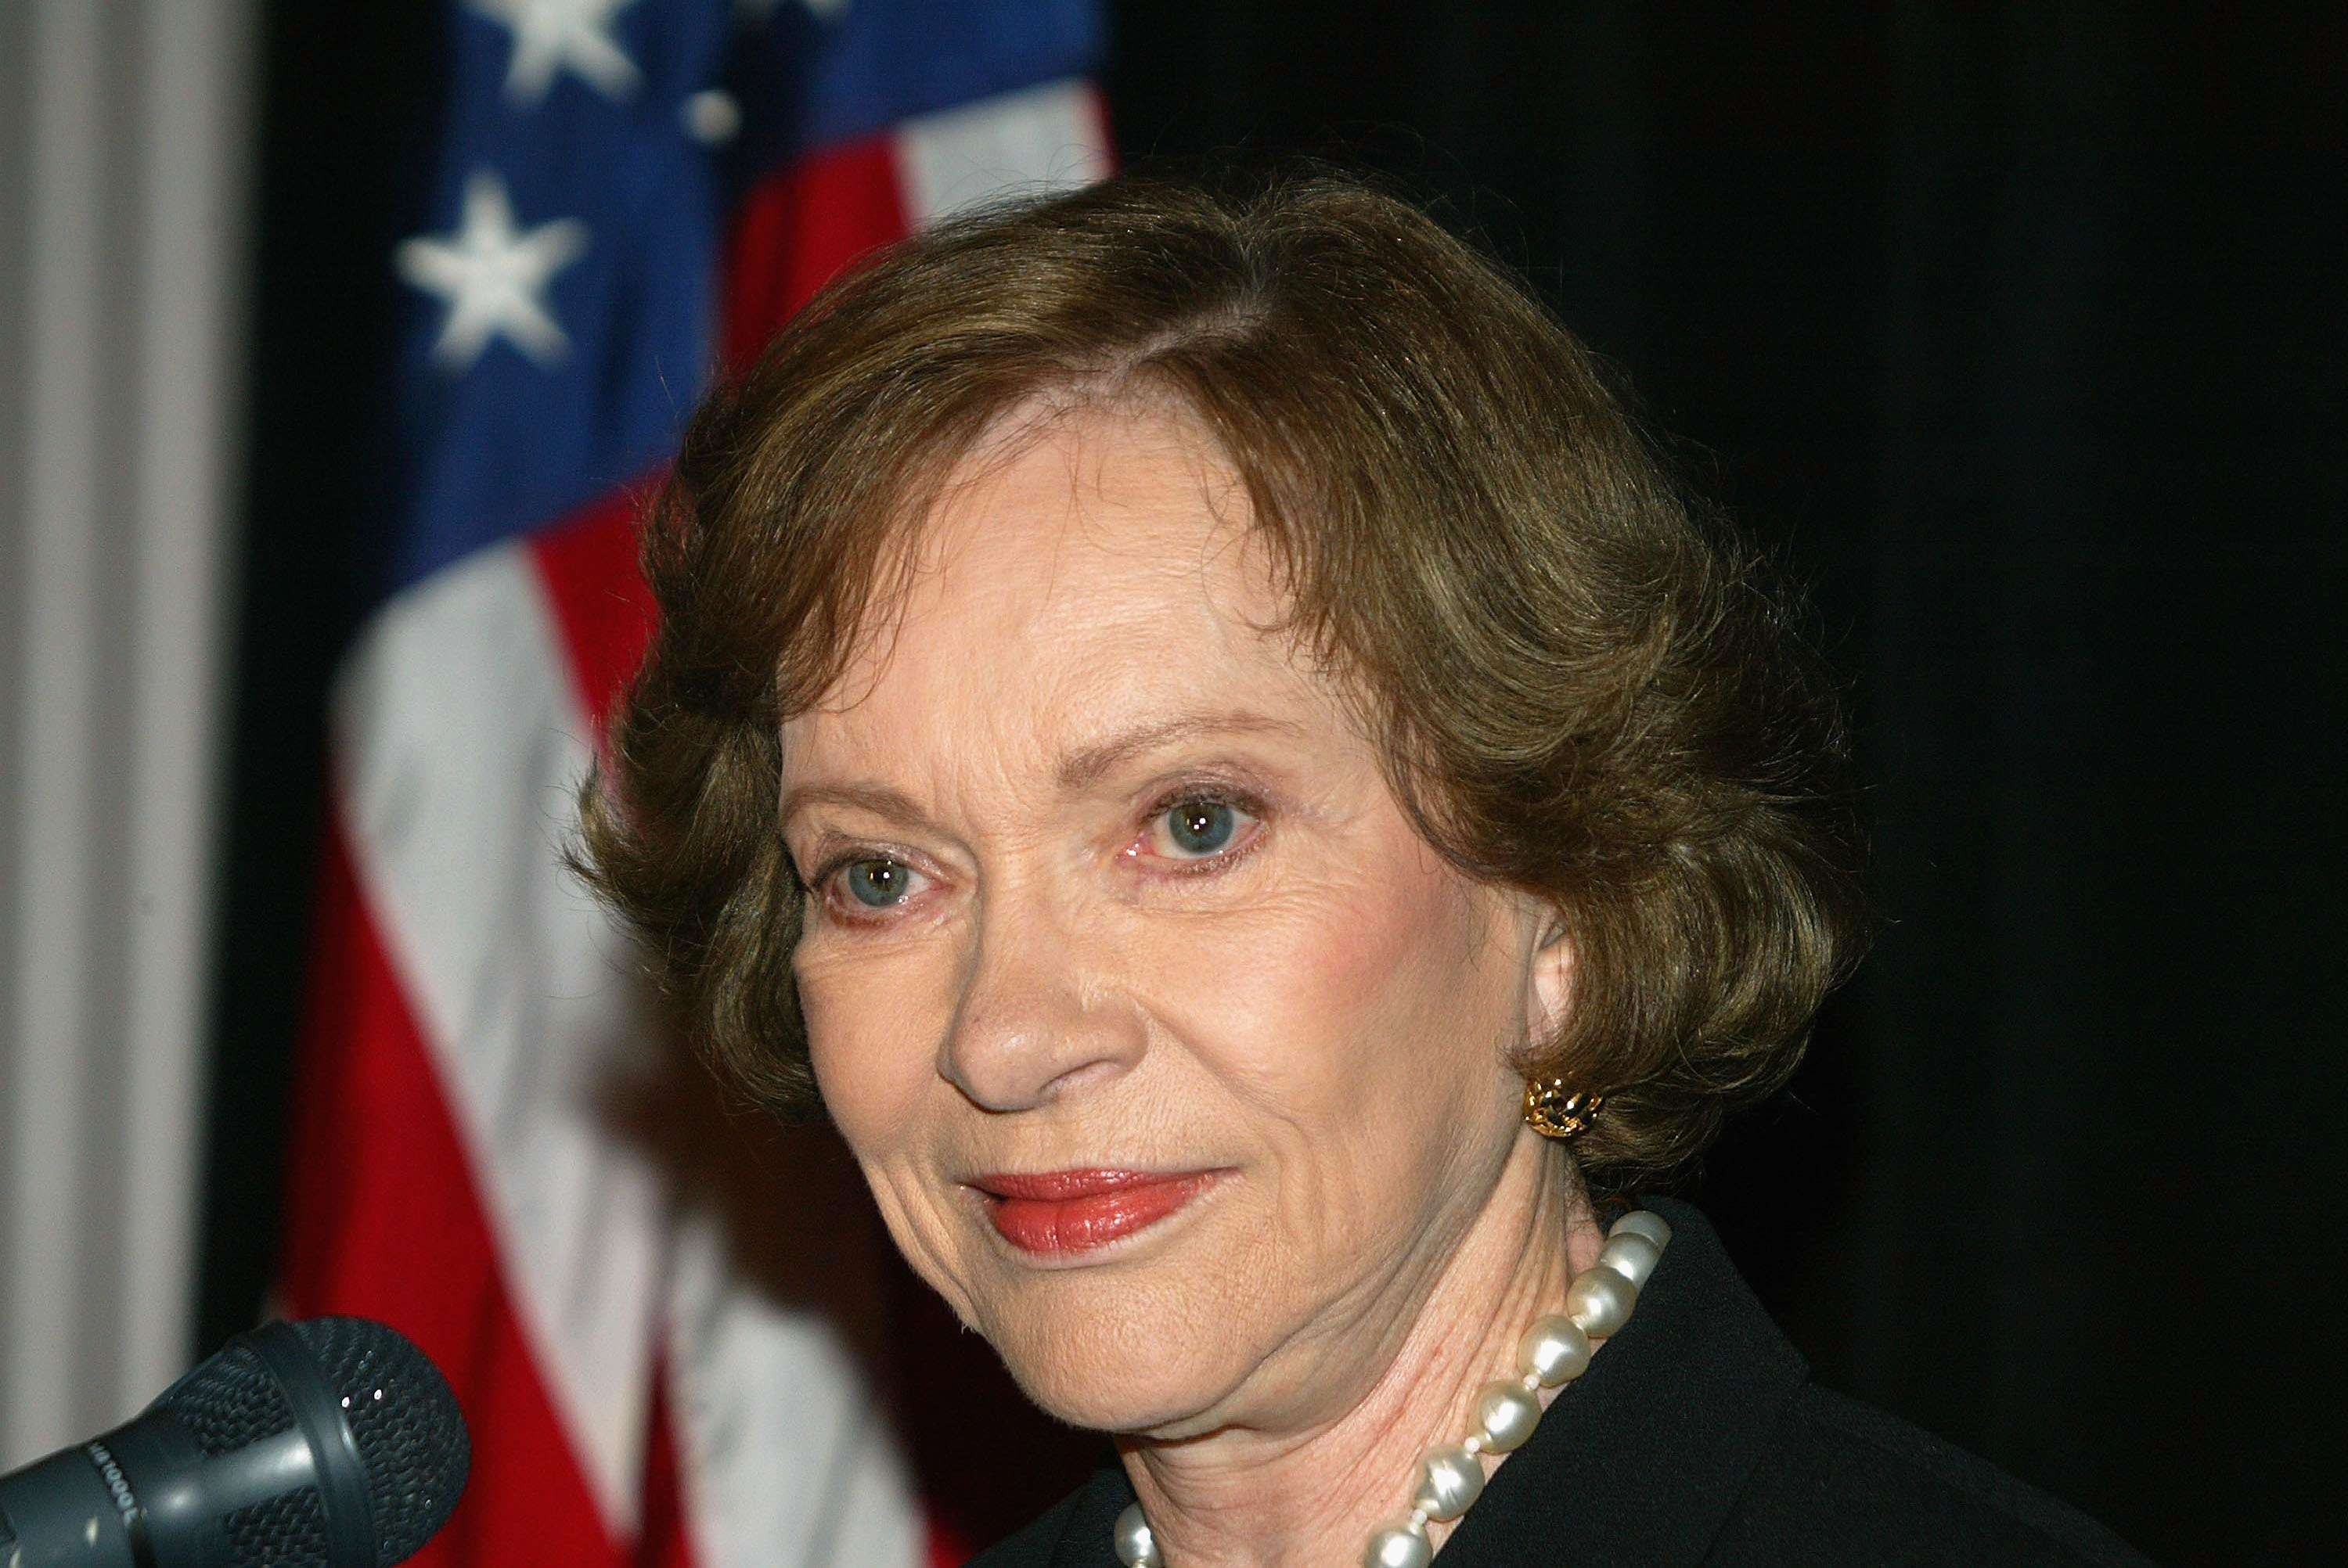 Former U.S. First Lady Rosalynn Carter at the Death Penalty Focus Awards in Beverly Hills, California on April 20, 2004 | Source: Getty Images